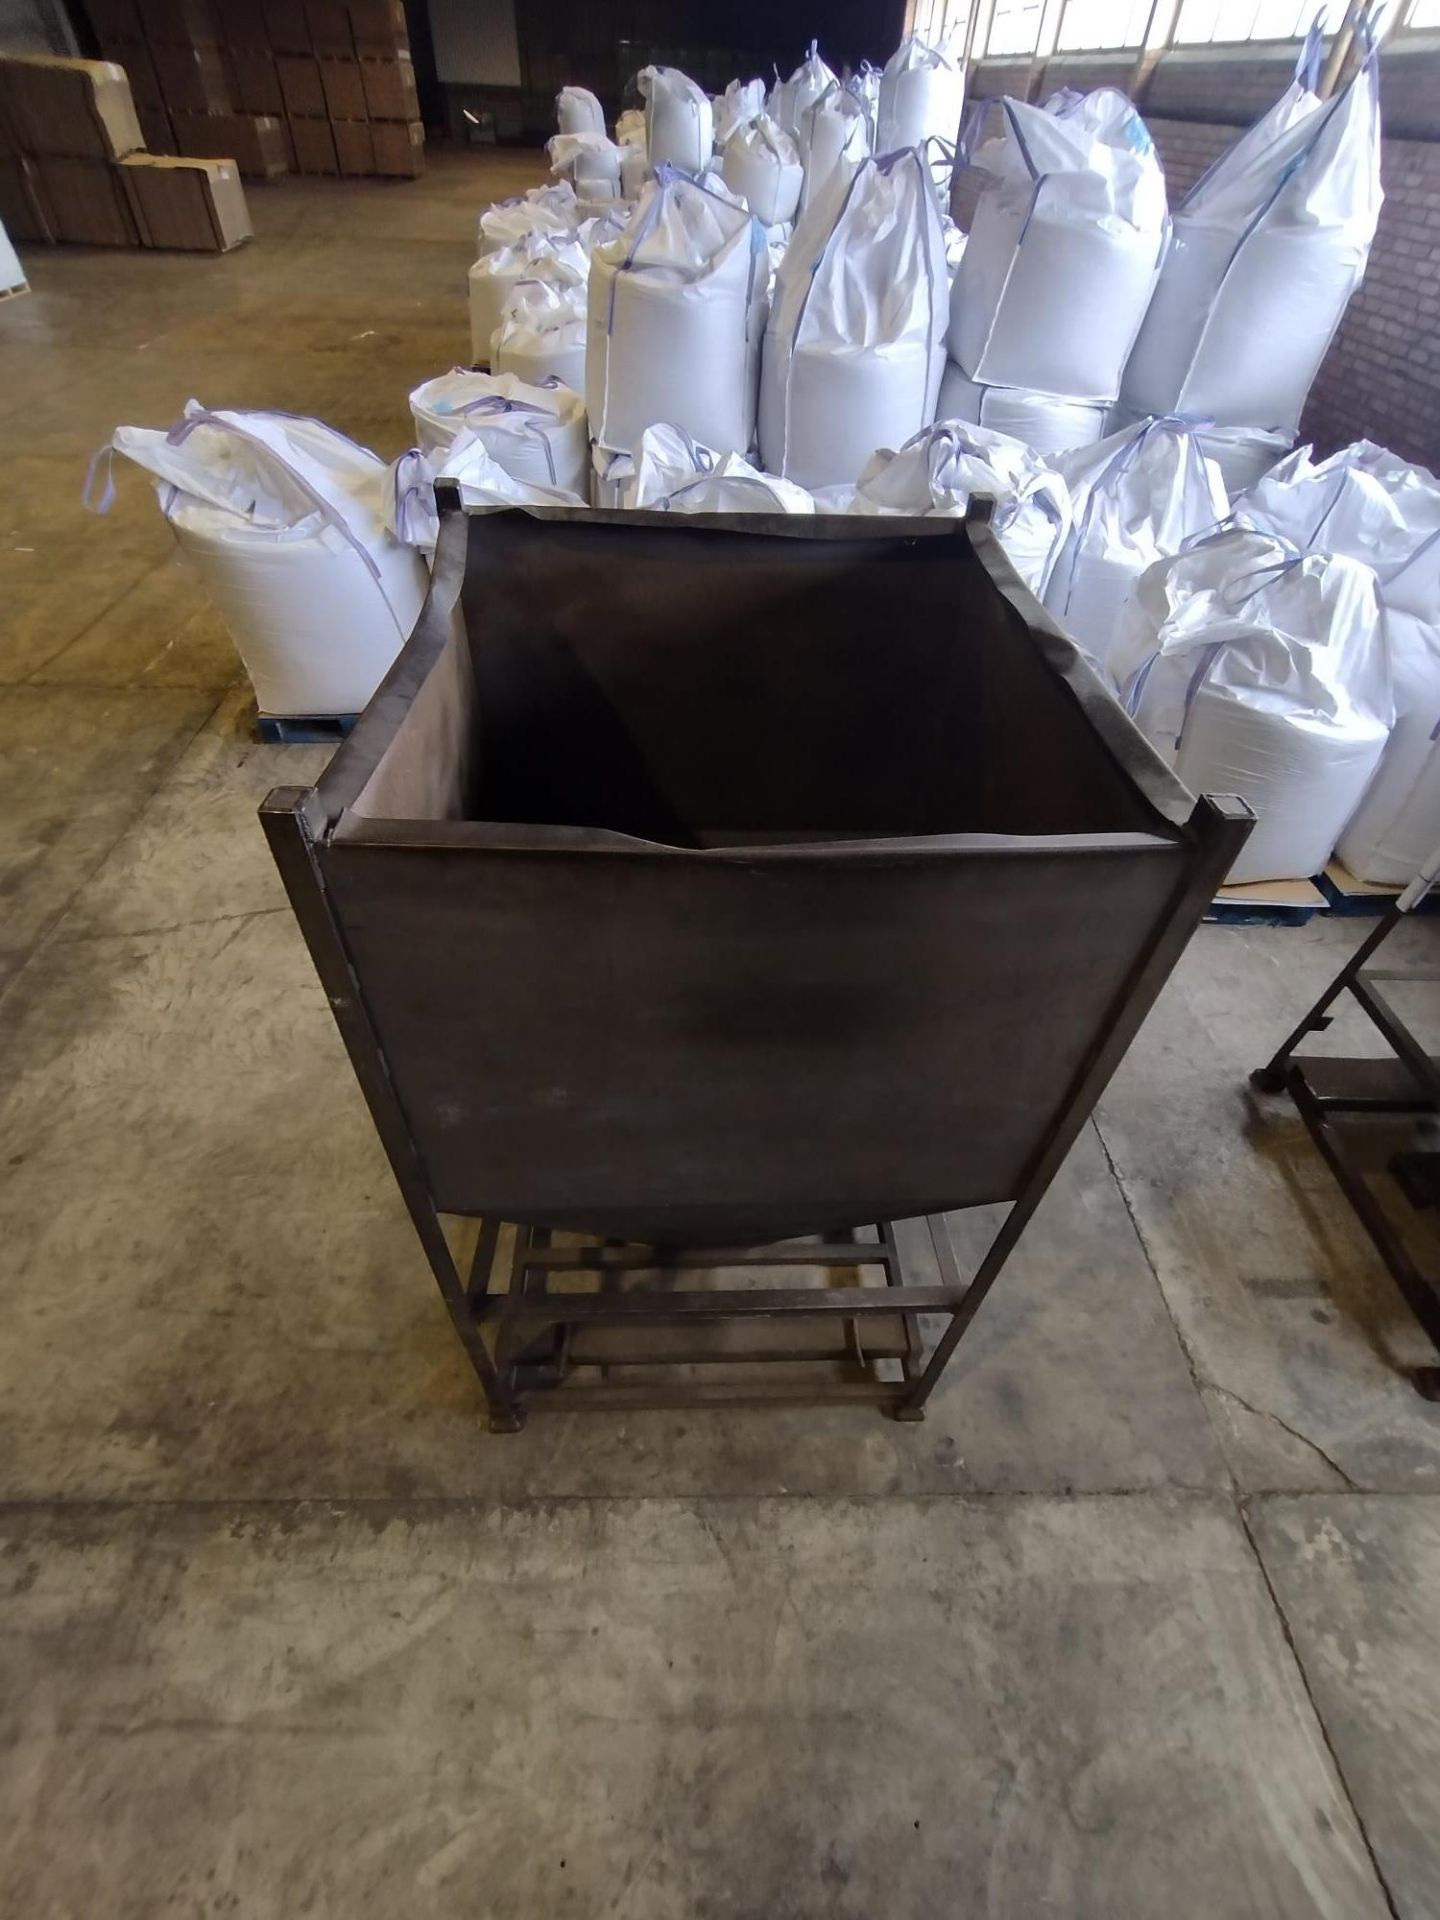 Five Hopper Bottomed Tote Bins, approx. 1285mm x 1285mm x 1950mm. Lot located Bretherton, - Image 3 of 3